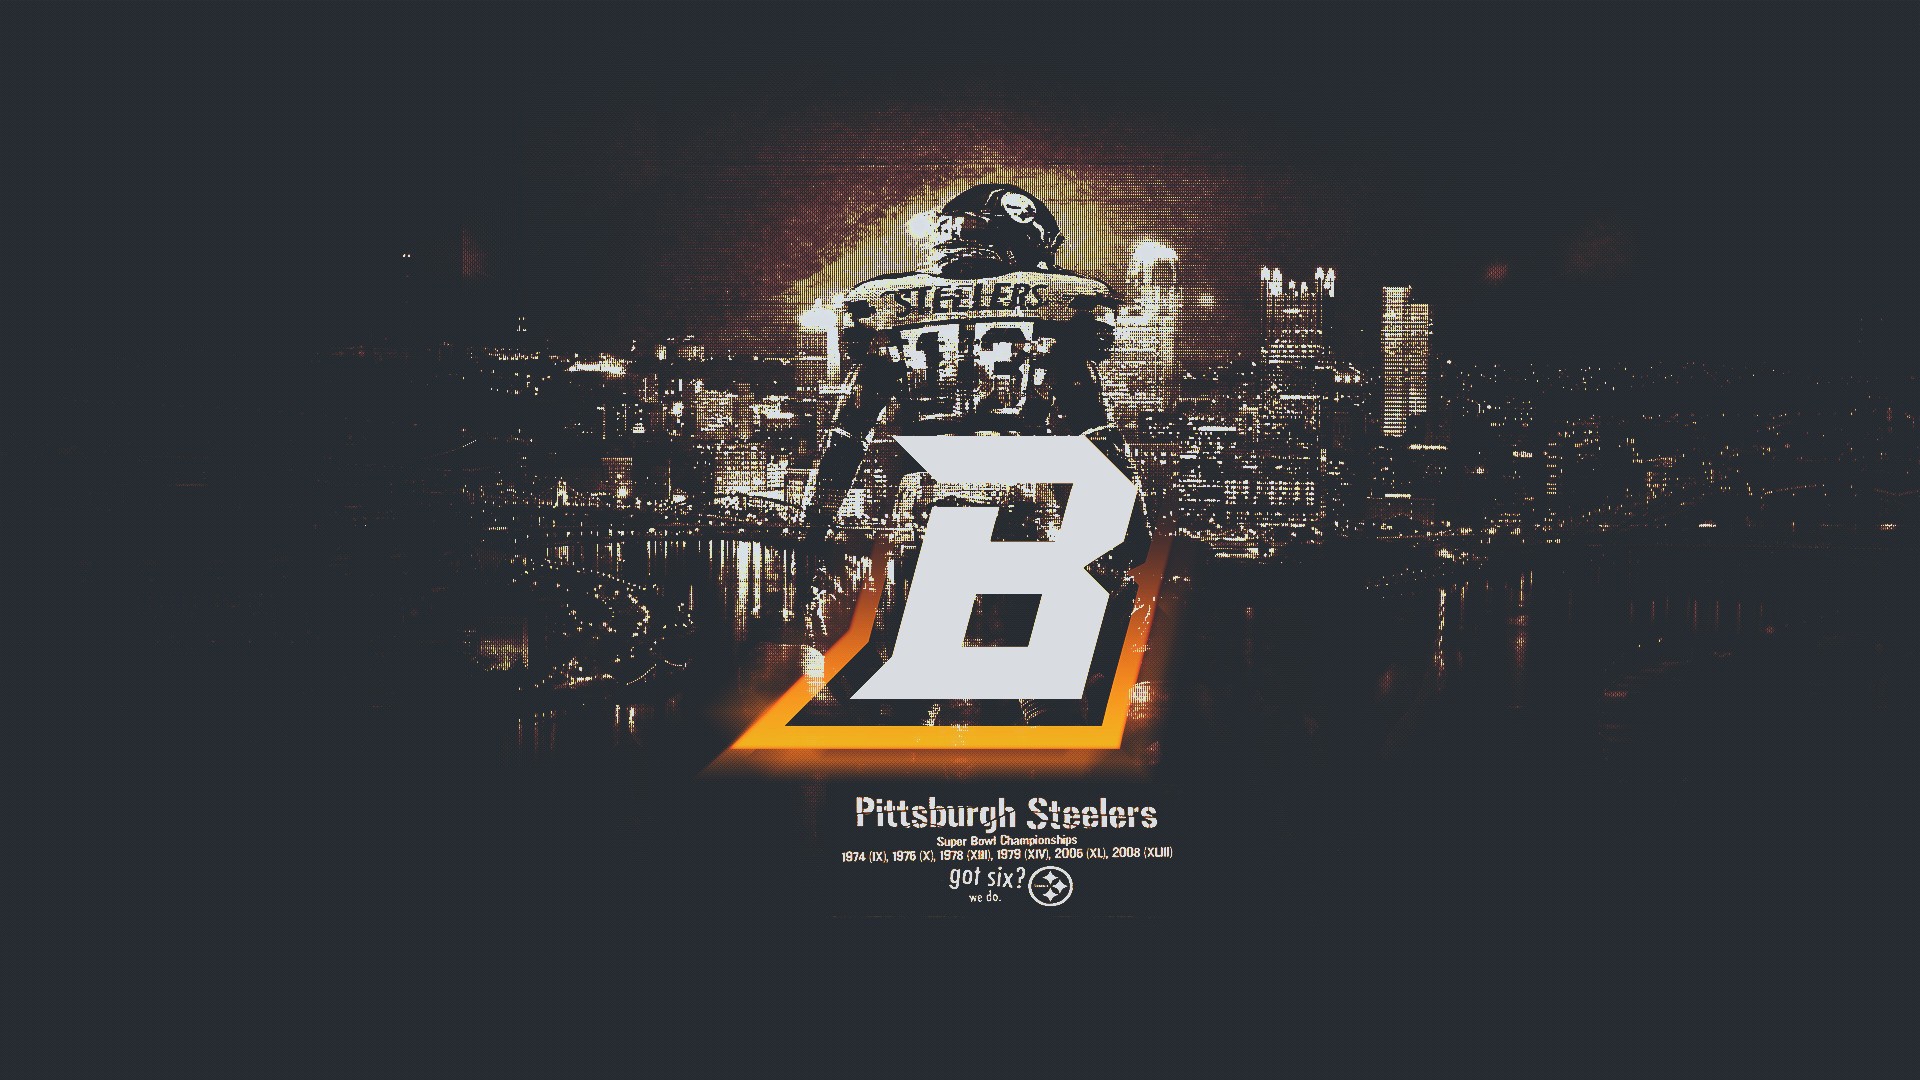 Wallpapers Steelers with resolution 1920x1080 pixel. You can make this wallpaper for your Mac or Windows Desktop Background, iPhone, Android or Tablet and another Smartphone device